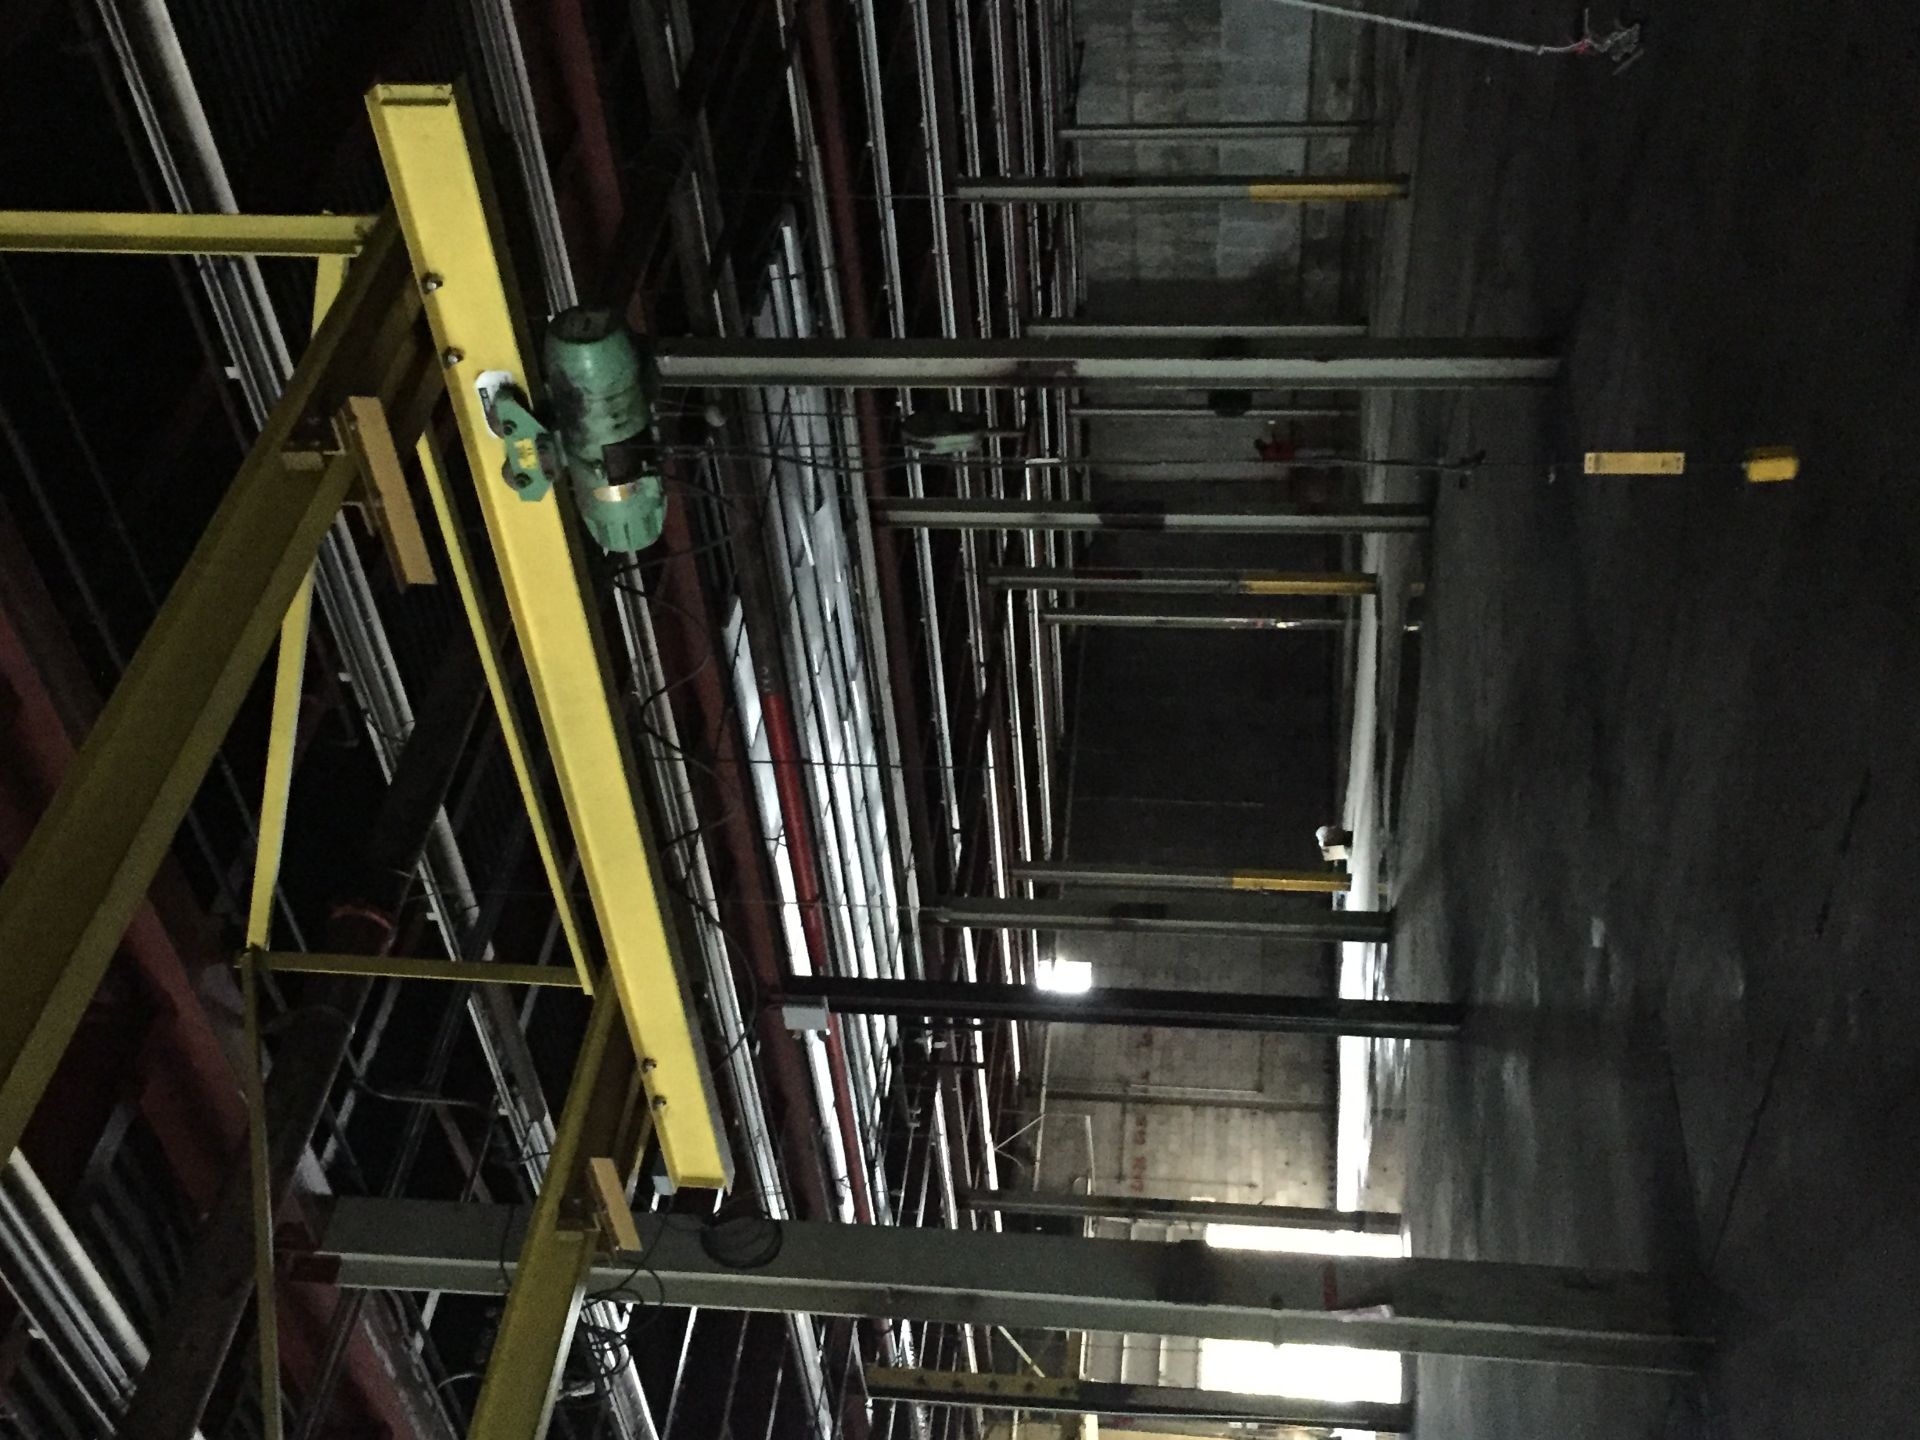 P & H ZIP LIFT 2 TON OVERHEAD CRANE SYSTEM, READY TO LOAD. - Image 2 of 6